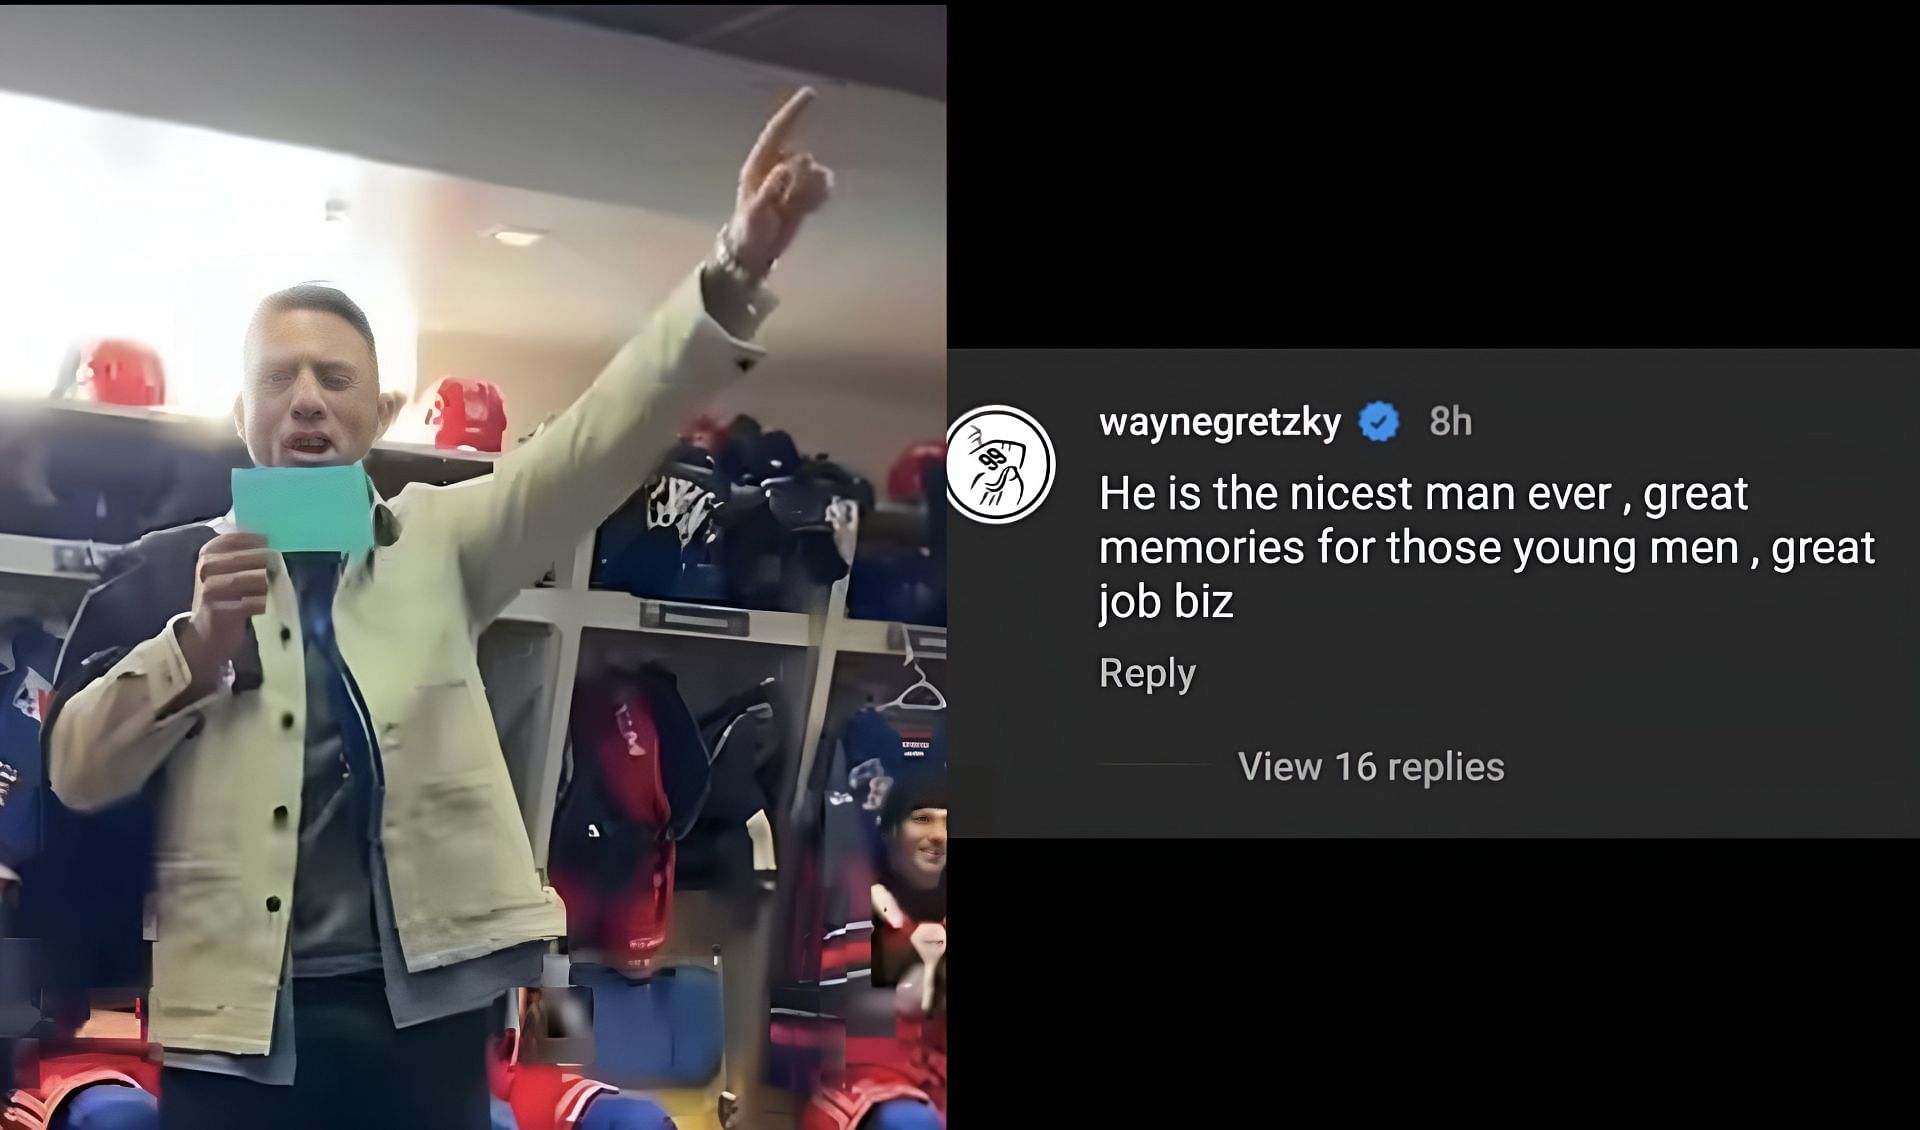 Wayne Gretzky lauds Paul Bissonnette for his energetic lineup reveal routine for Kitchener Rangers